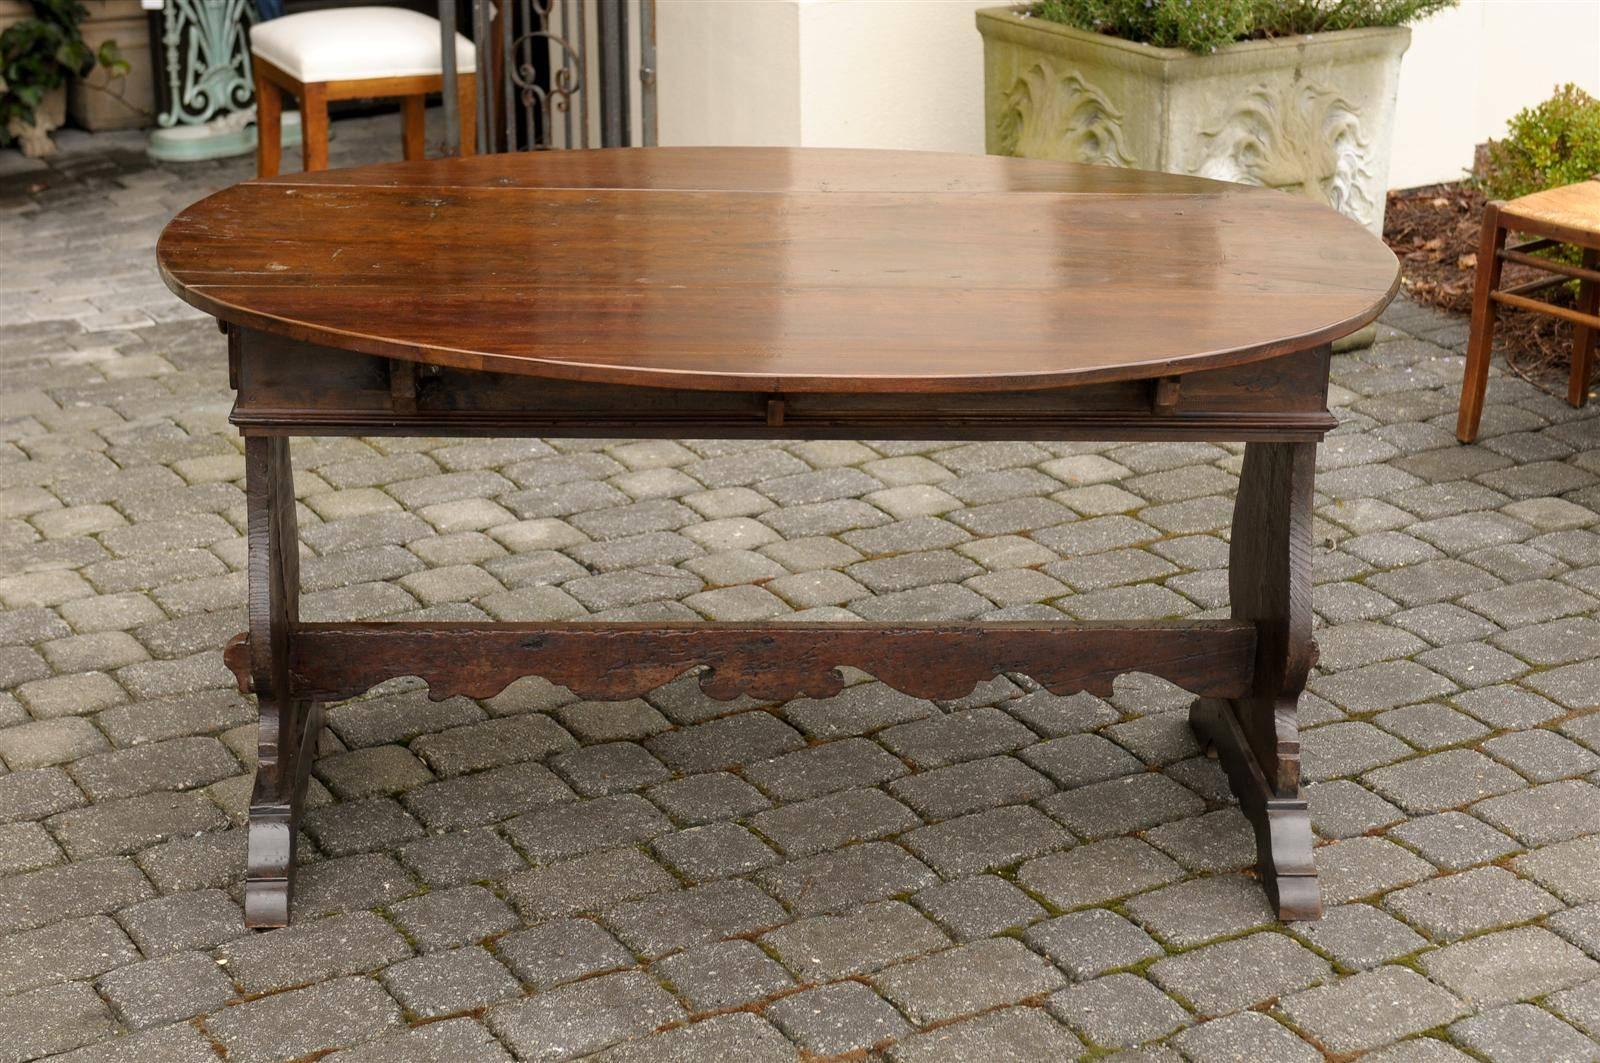 Oval Italian Walnut Drop-Leaf Table from the Late 18th Century with Trestle Base 3